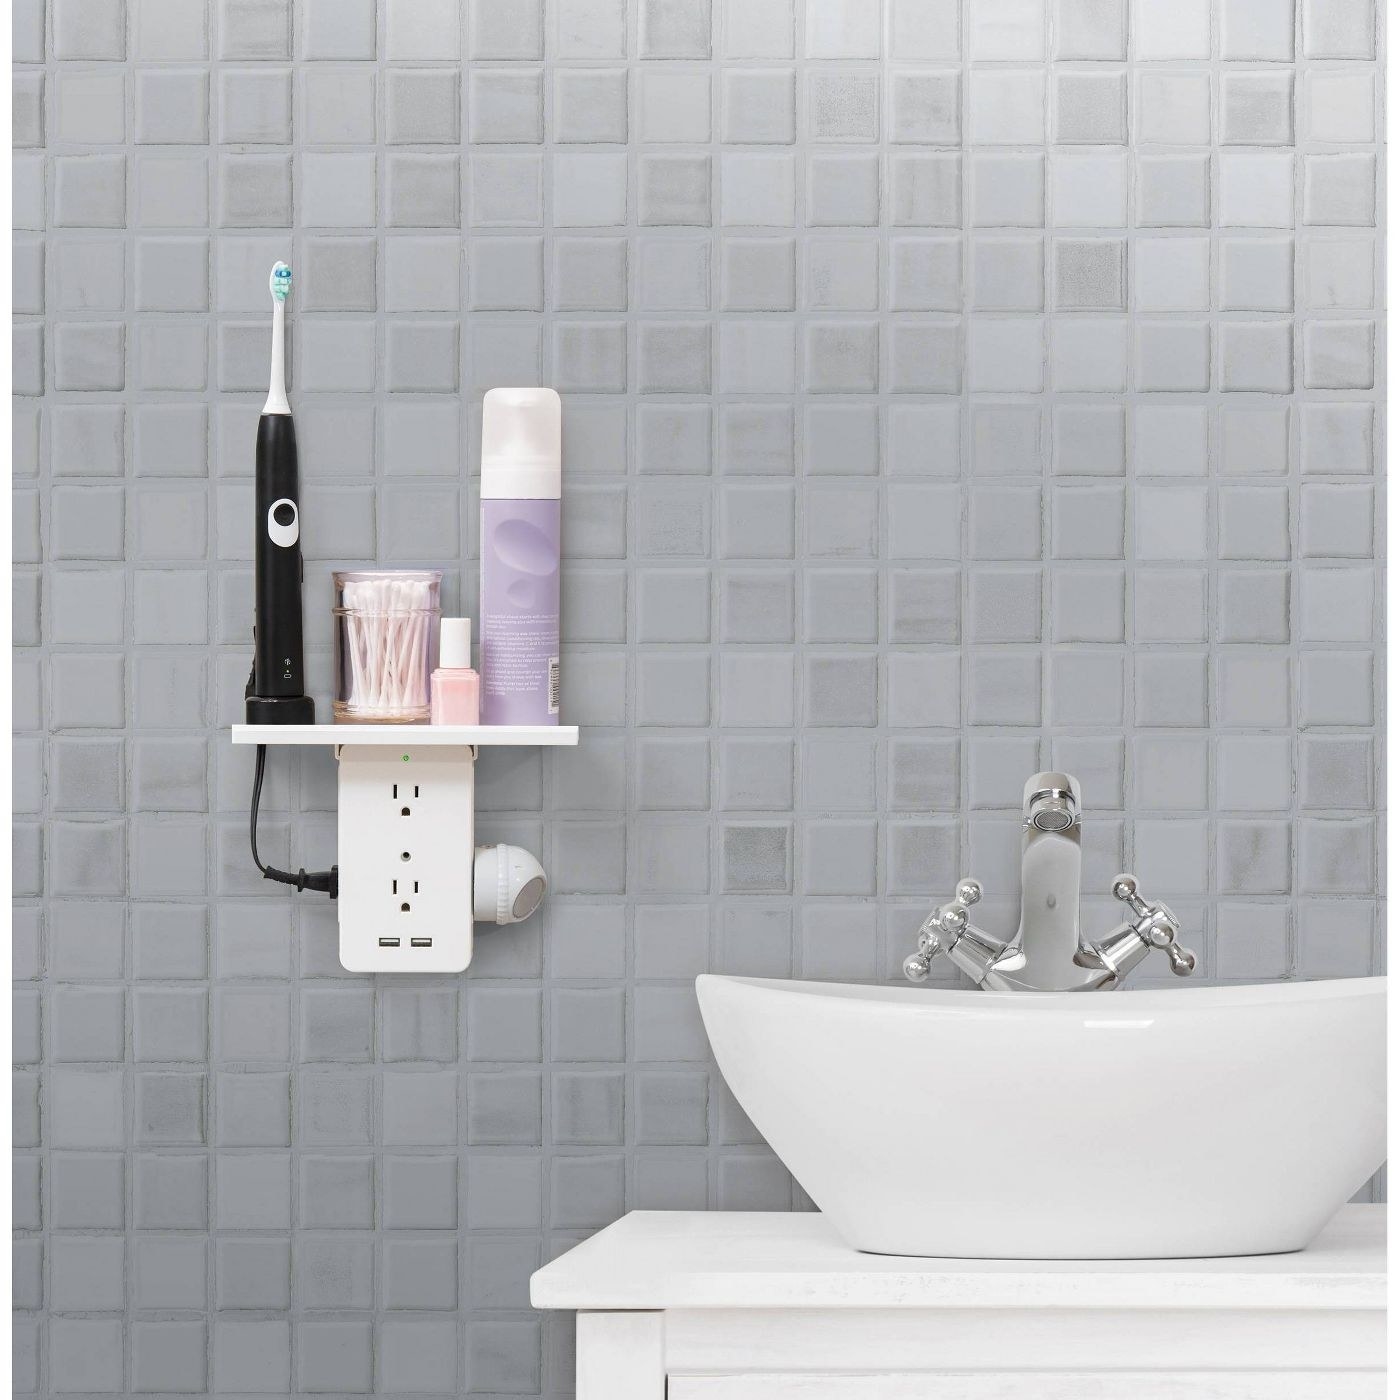 the outlet shelf with an electric toothbrush and toiletries stored on the shelf